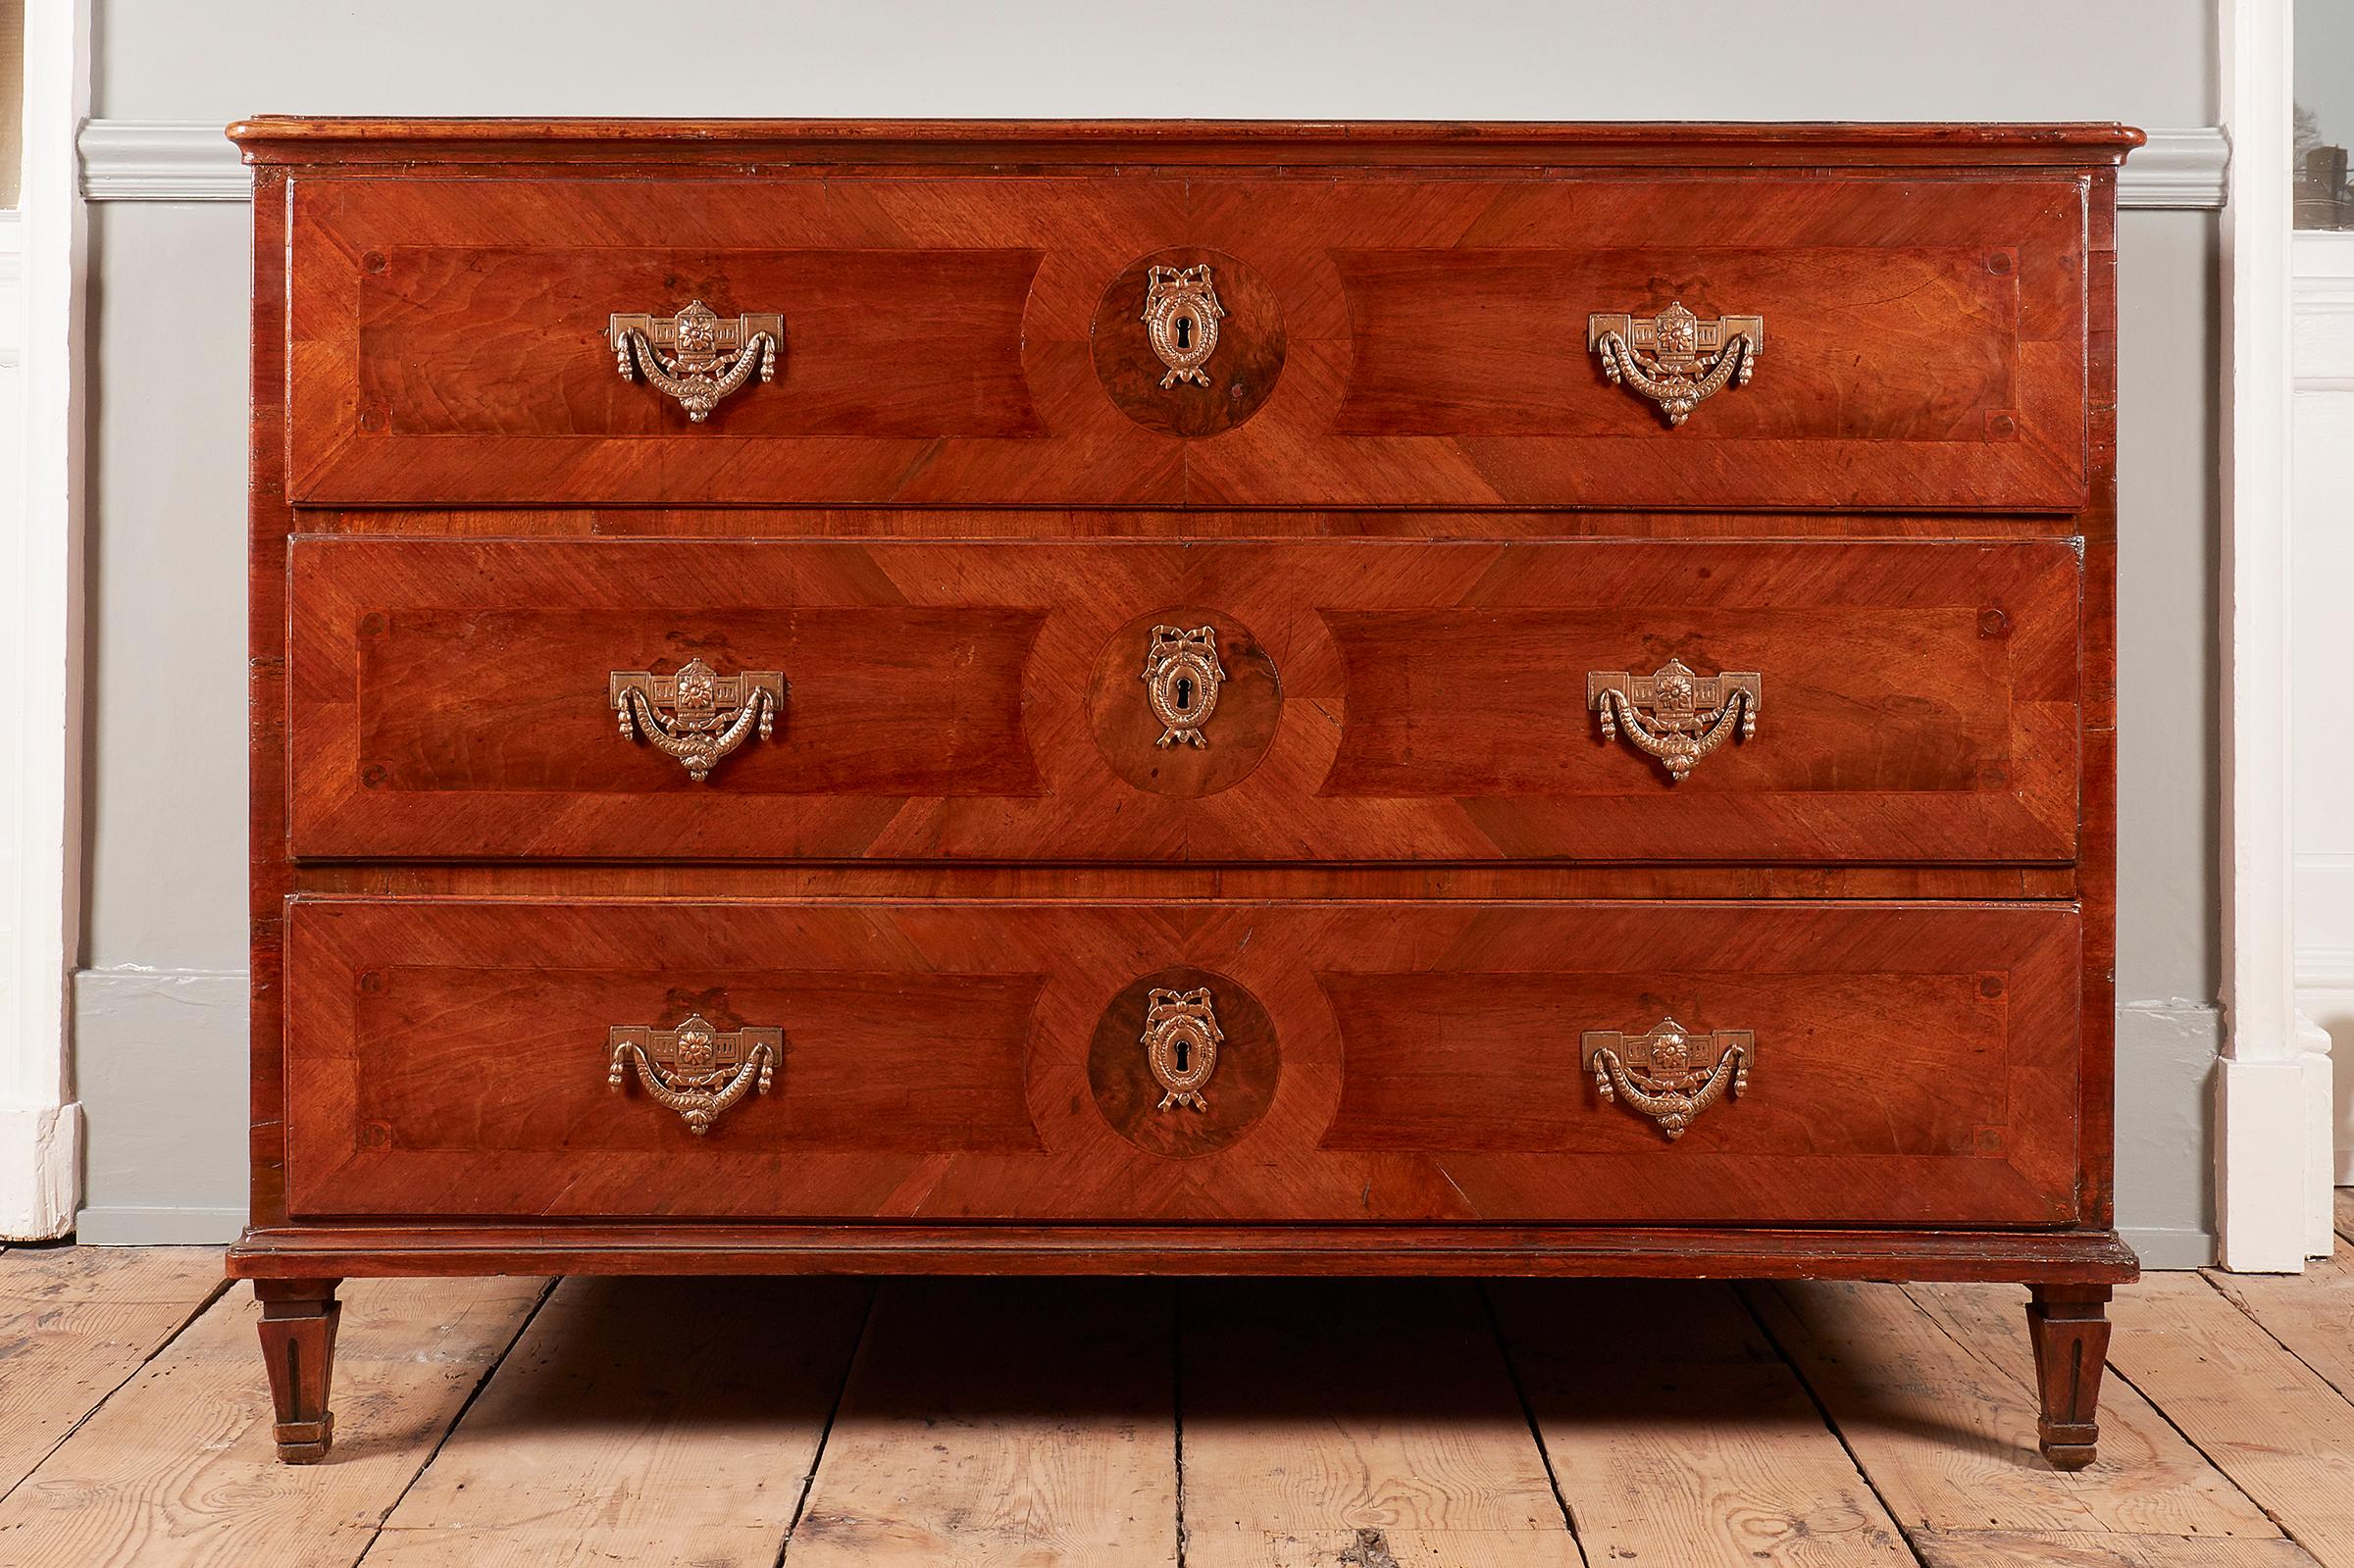 An Italian walnut commode, late 18th century, large proportions, with three drawers, each drawer with escutcheons and handles in brass, on later tapering feet.